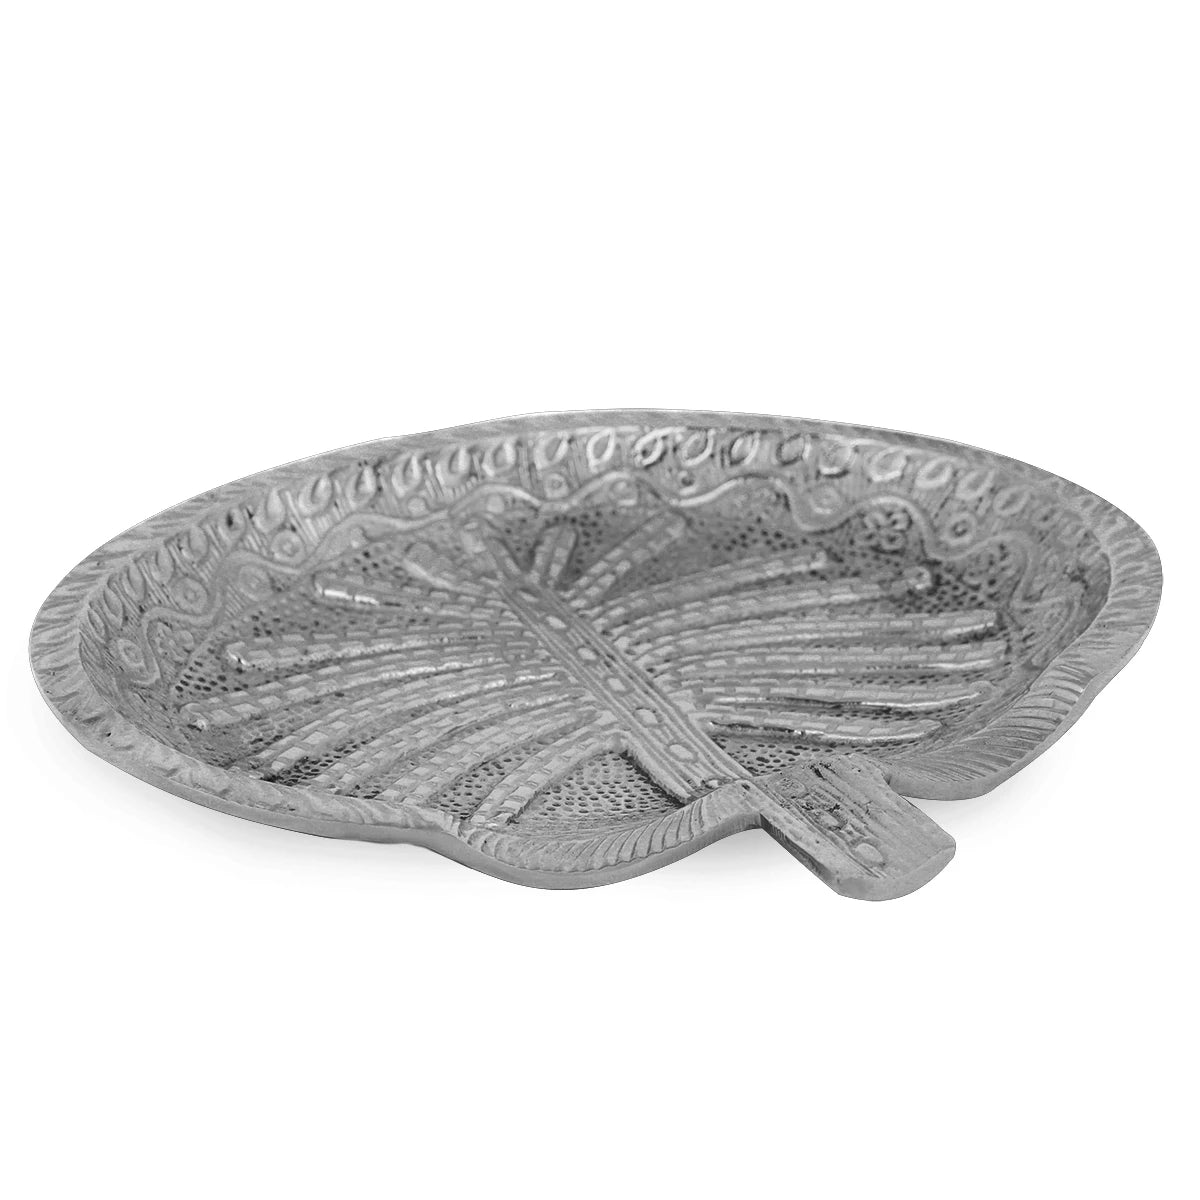 Angled View of Palm Engraved Ashtray - Silver Variant